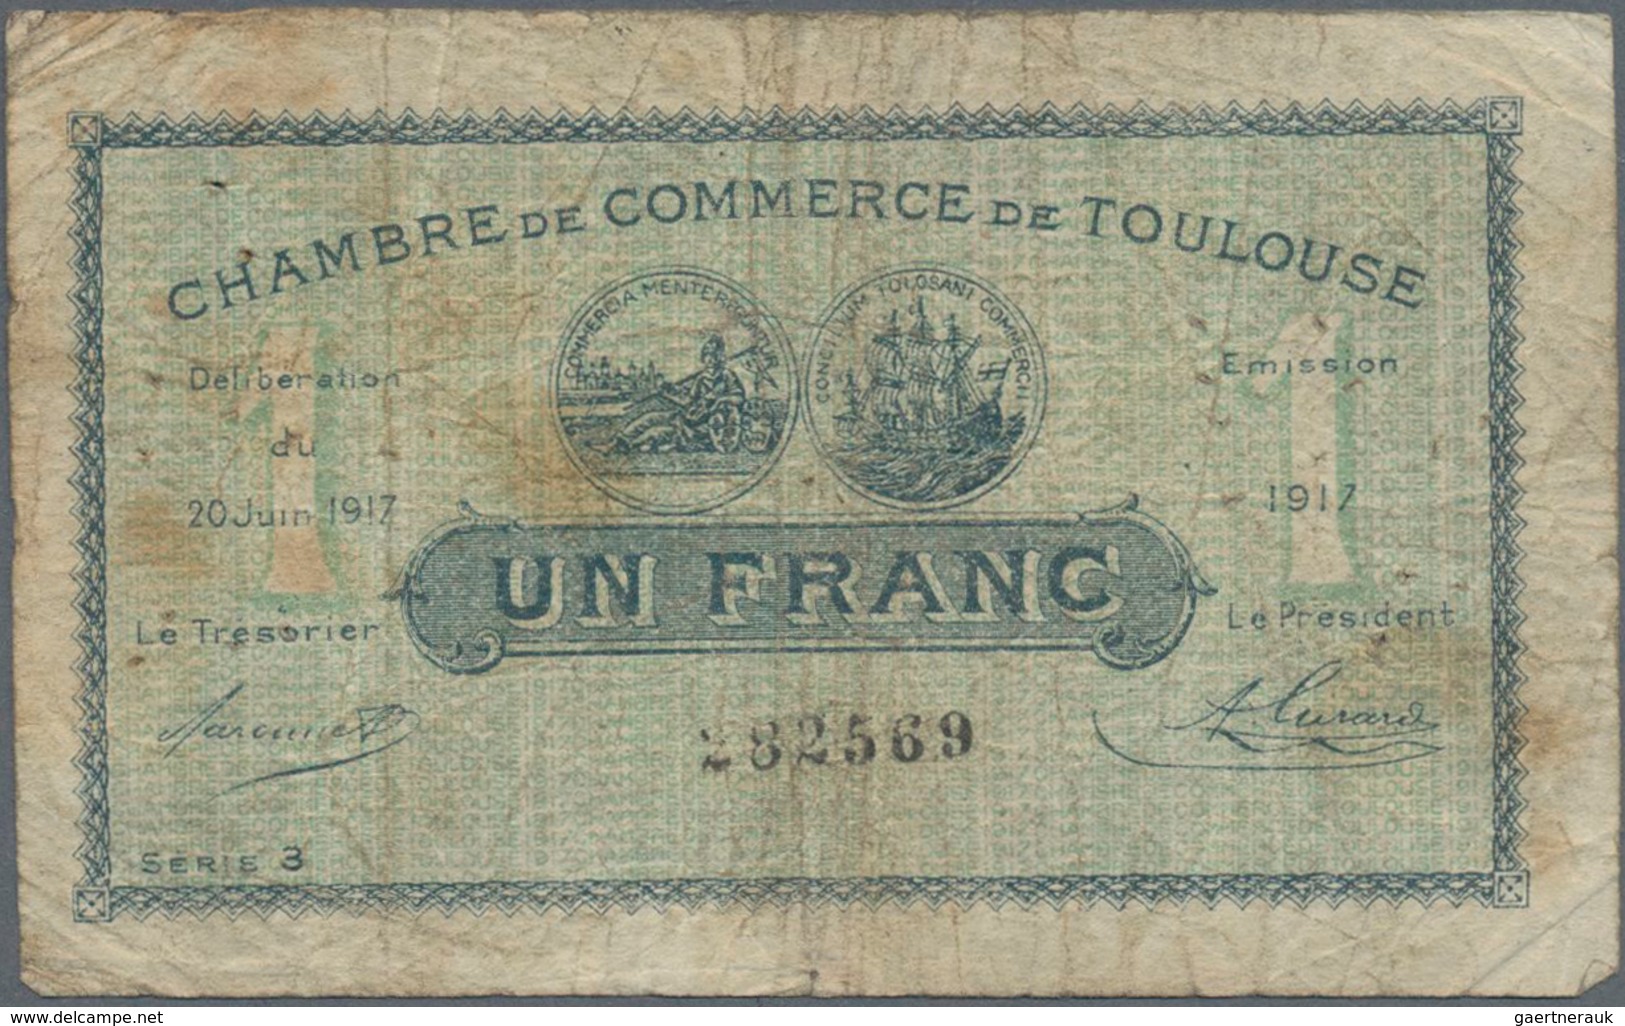 France / Frankreich: Collectors book with 111 pcs. Notgeld from different French cities and municipa